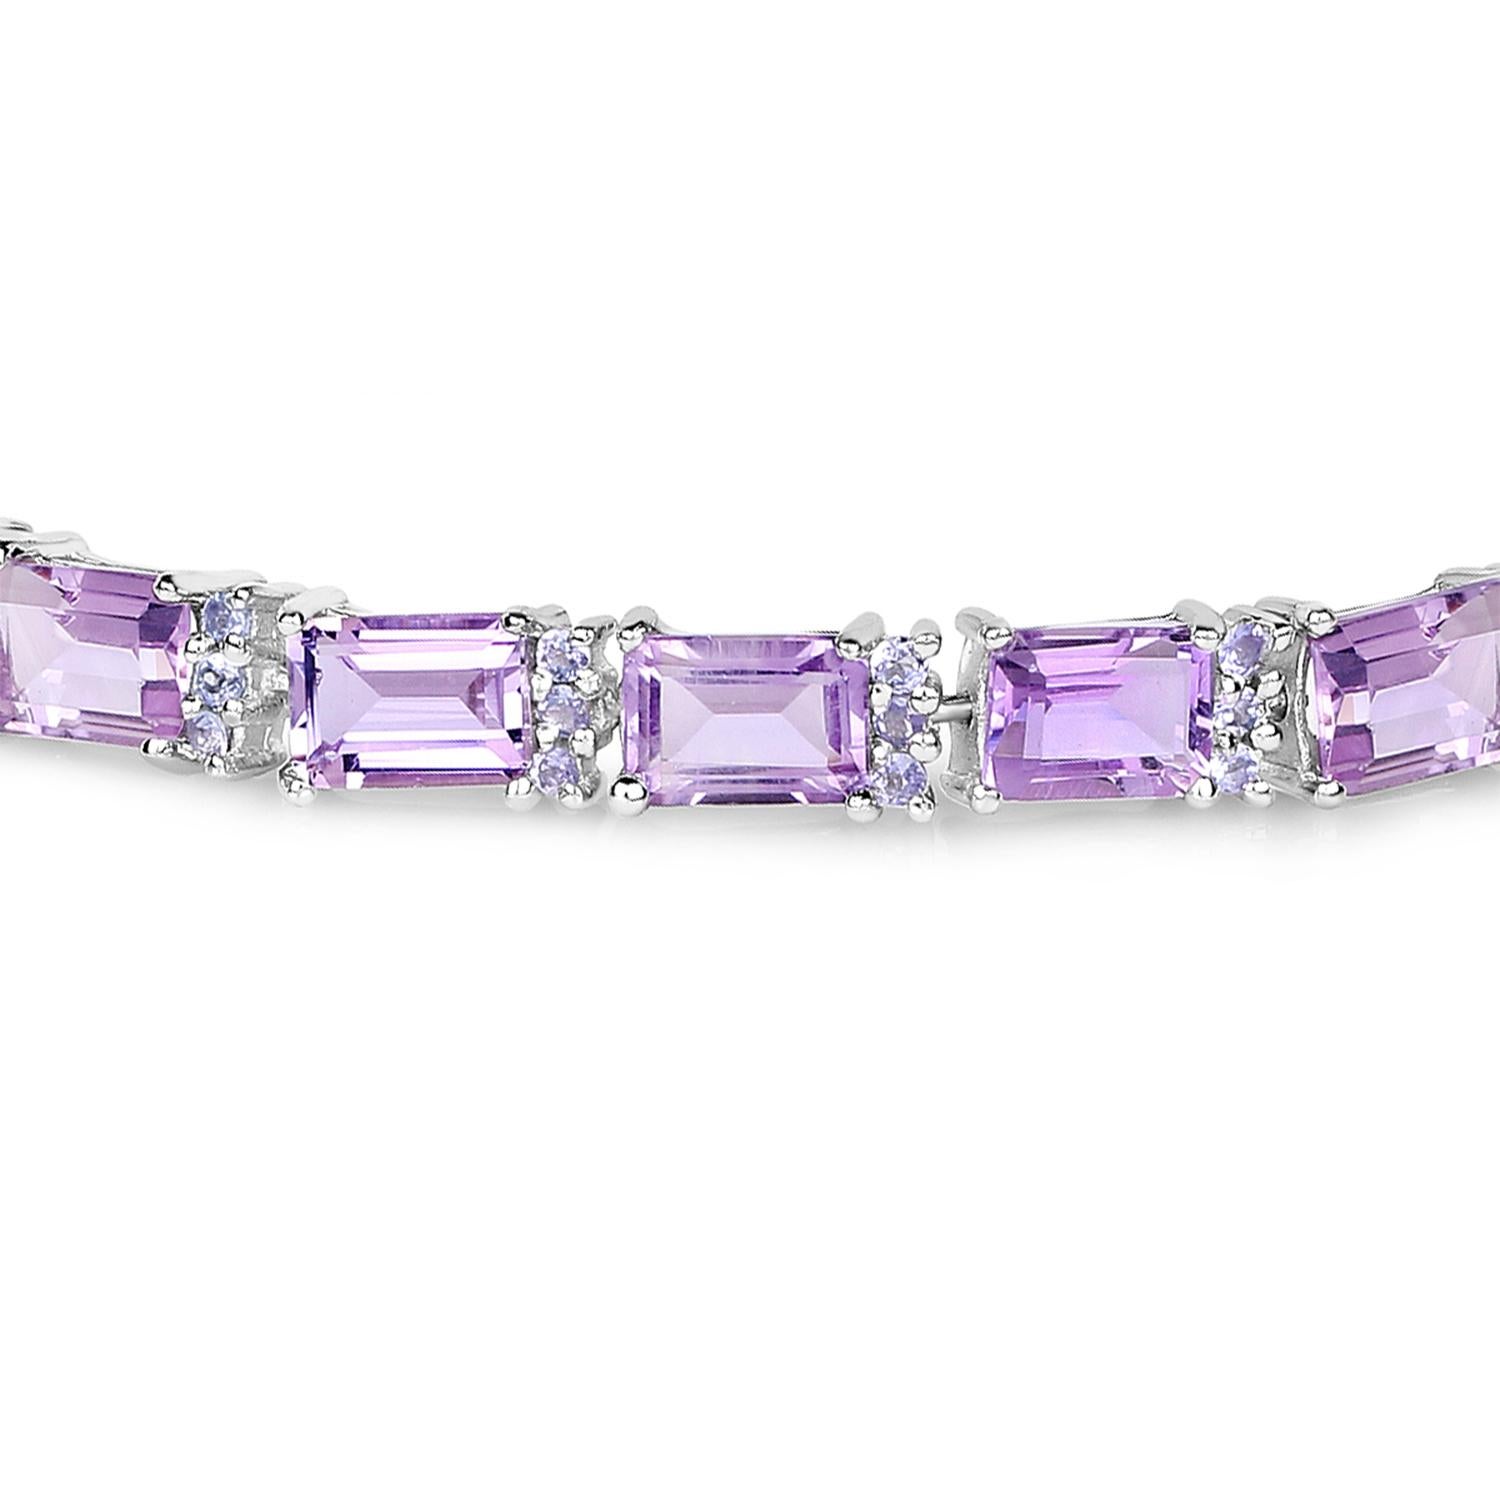 Mixed Cut Amethyst Bracelet With Tanzanite 19.19 Carats Rhodium Plated Sterling Silver For Sale